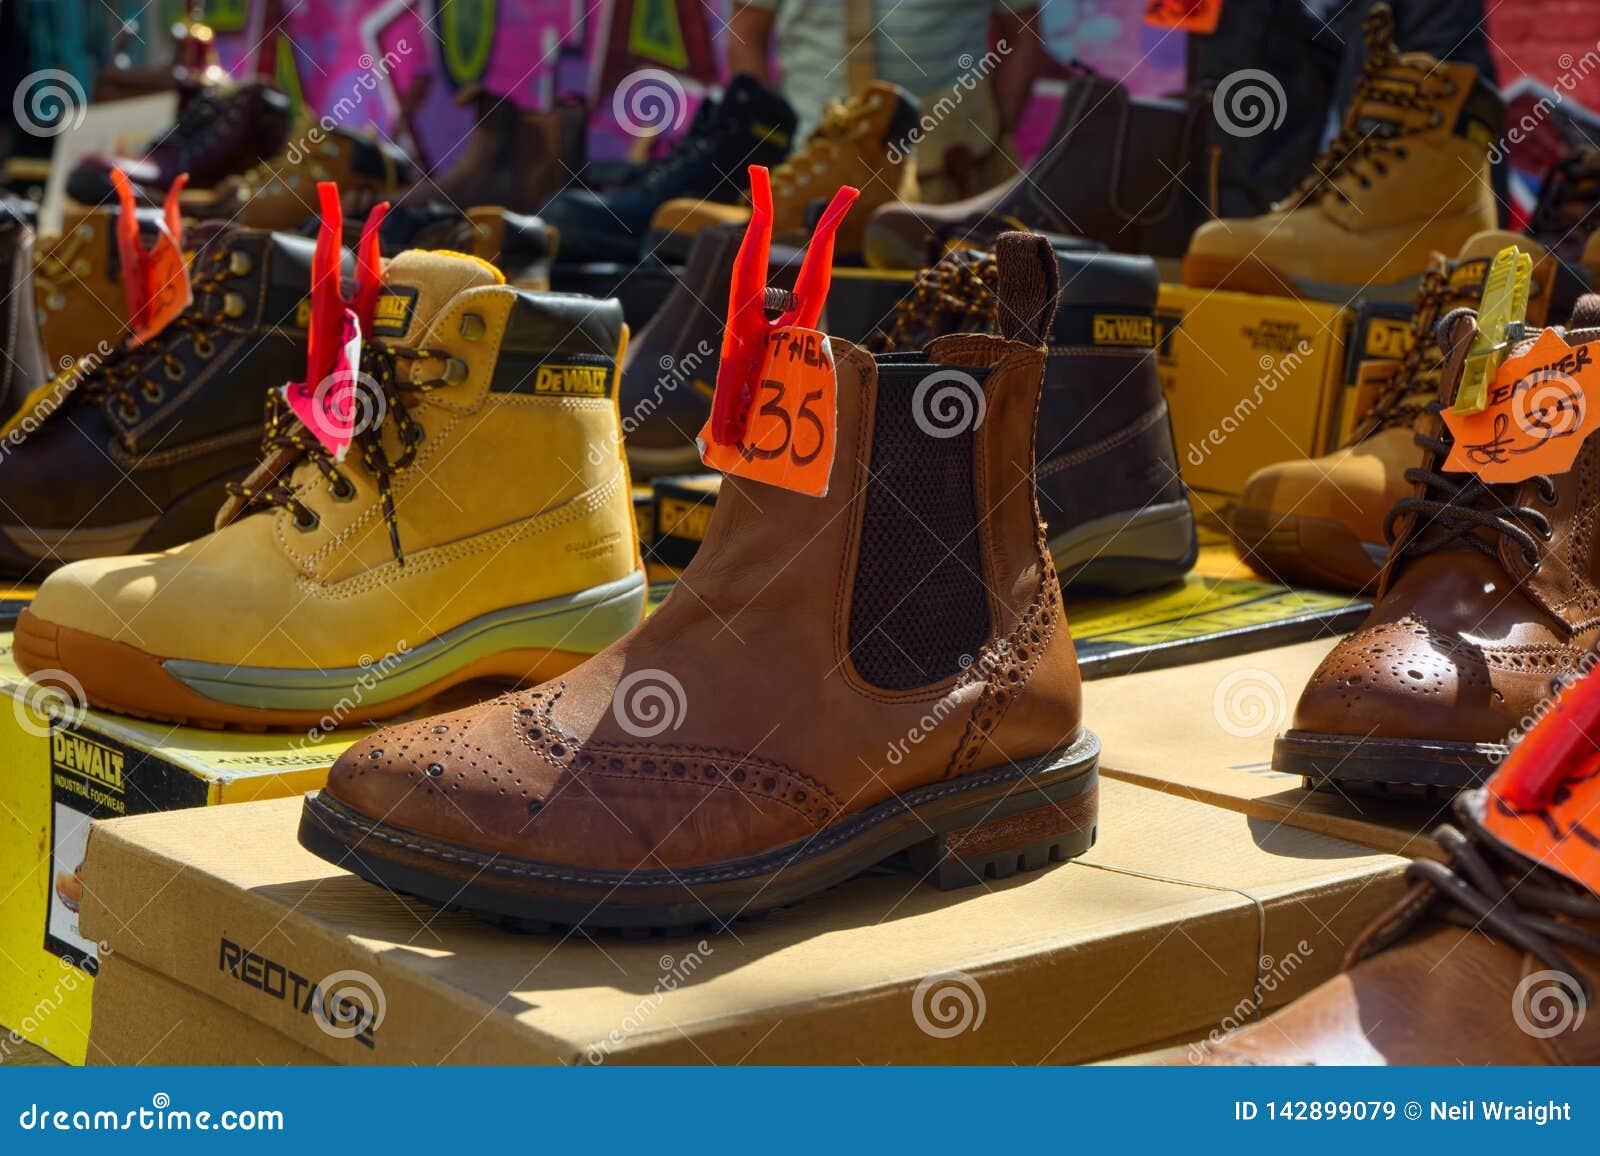 Top Named Brand Boots For Sale On Market Stall Editorial ...